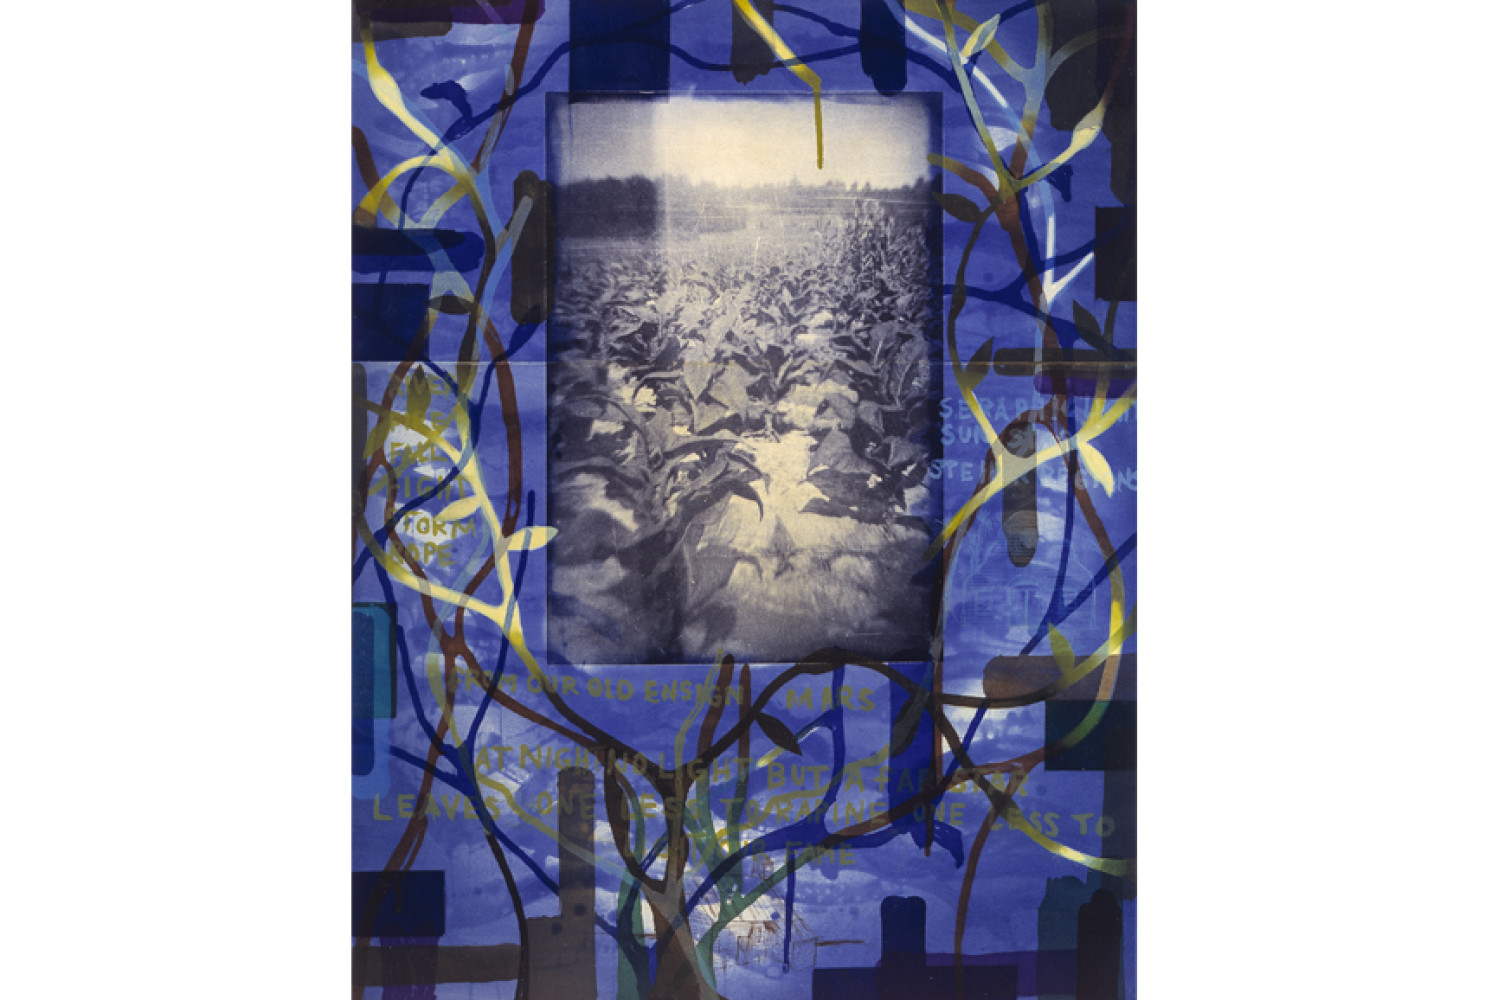 Tobacco Blues, 2000, by Radcliffe Bailey (American, b. 1968); color aquatint etching with photogravure and chine-colle on paper; 42 x 33 inches; Museum purchase; 2001.017